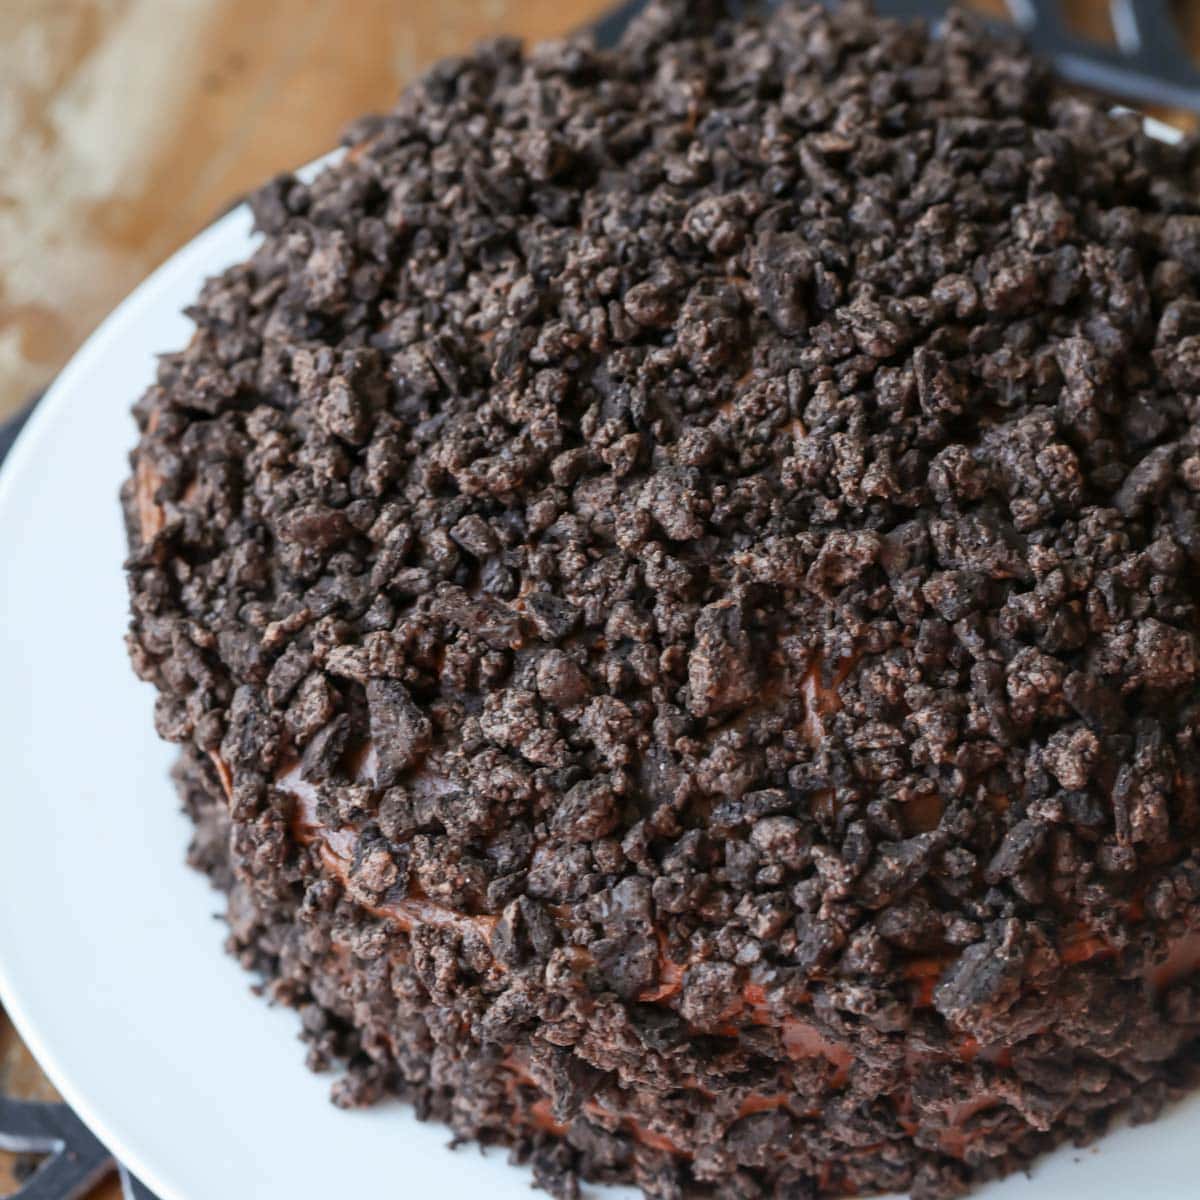 Chocolate cake covered in crushed Oreo